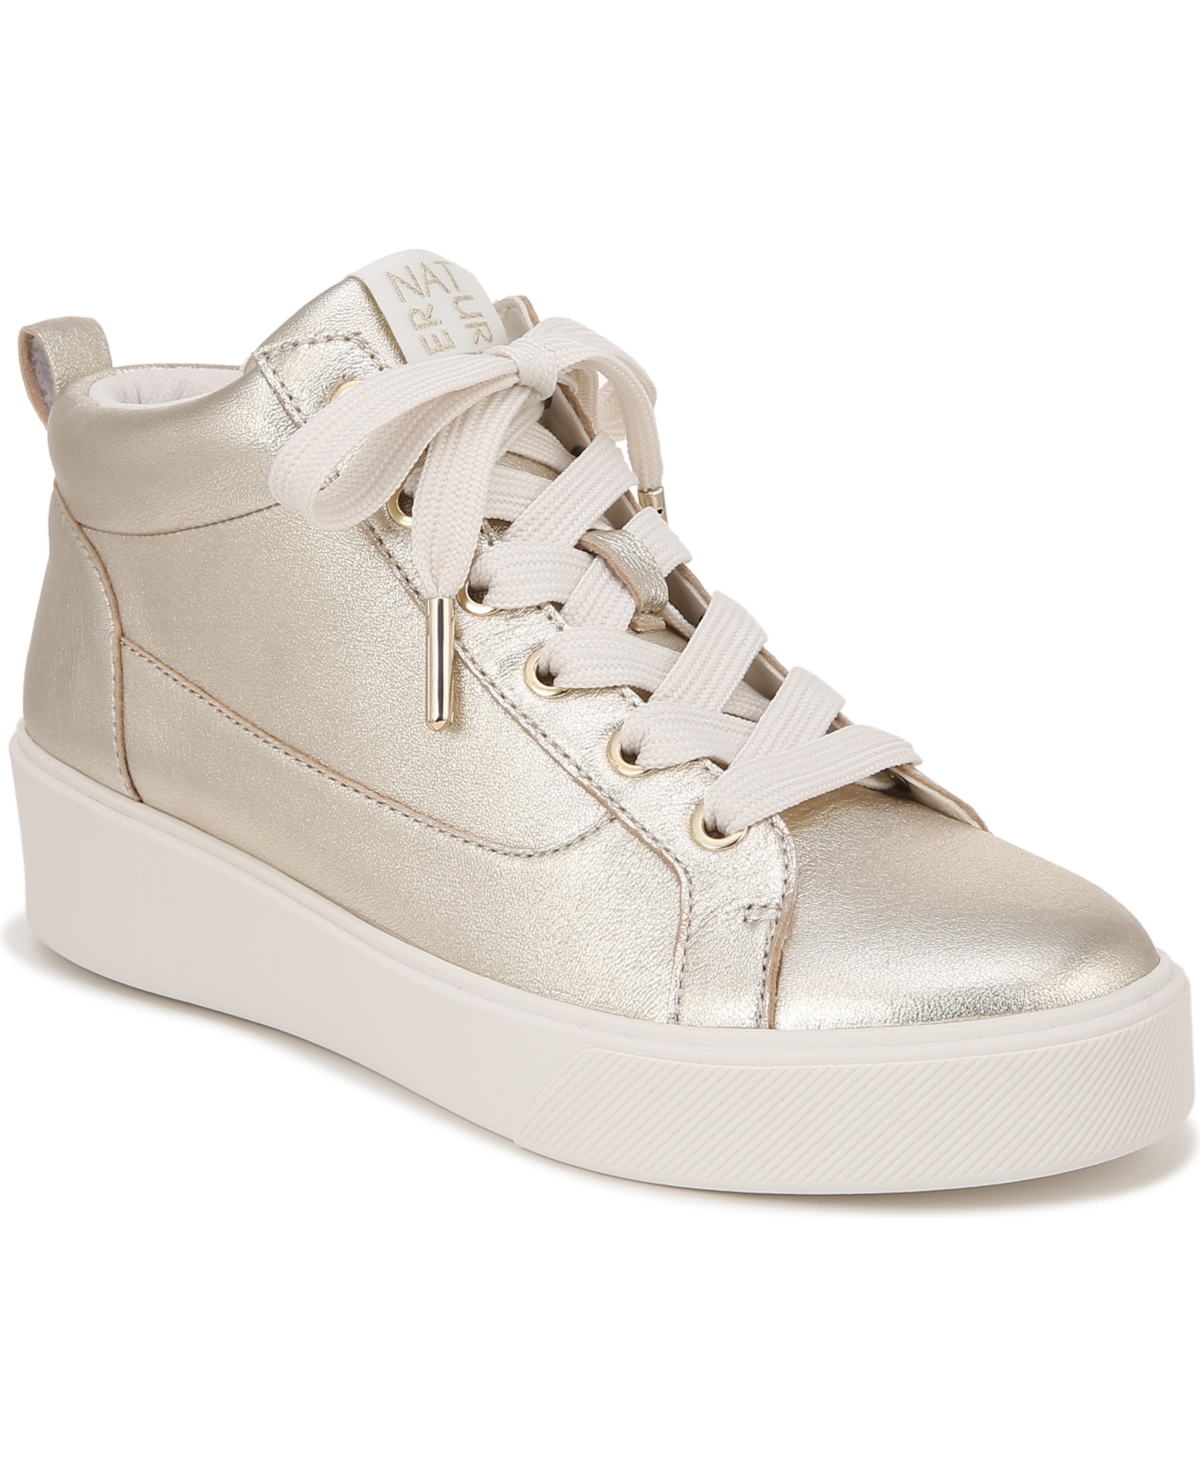 Morrison-Mid Sneakers - White Leather